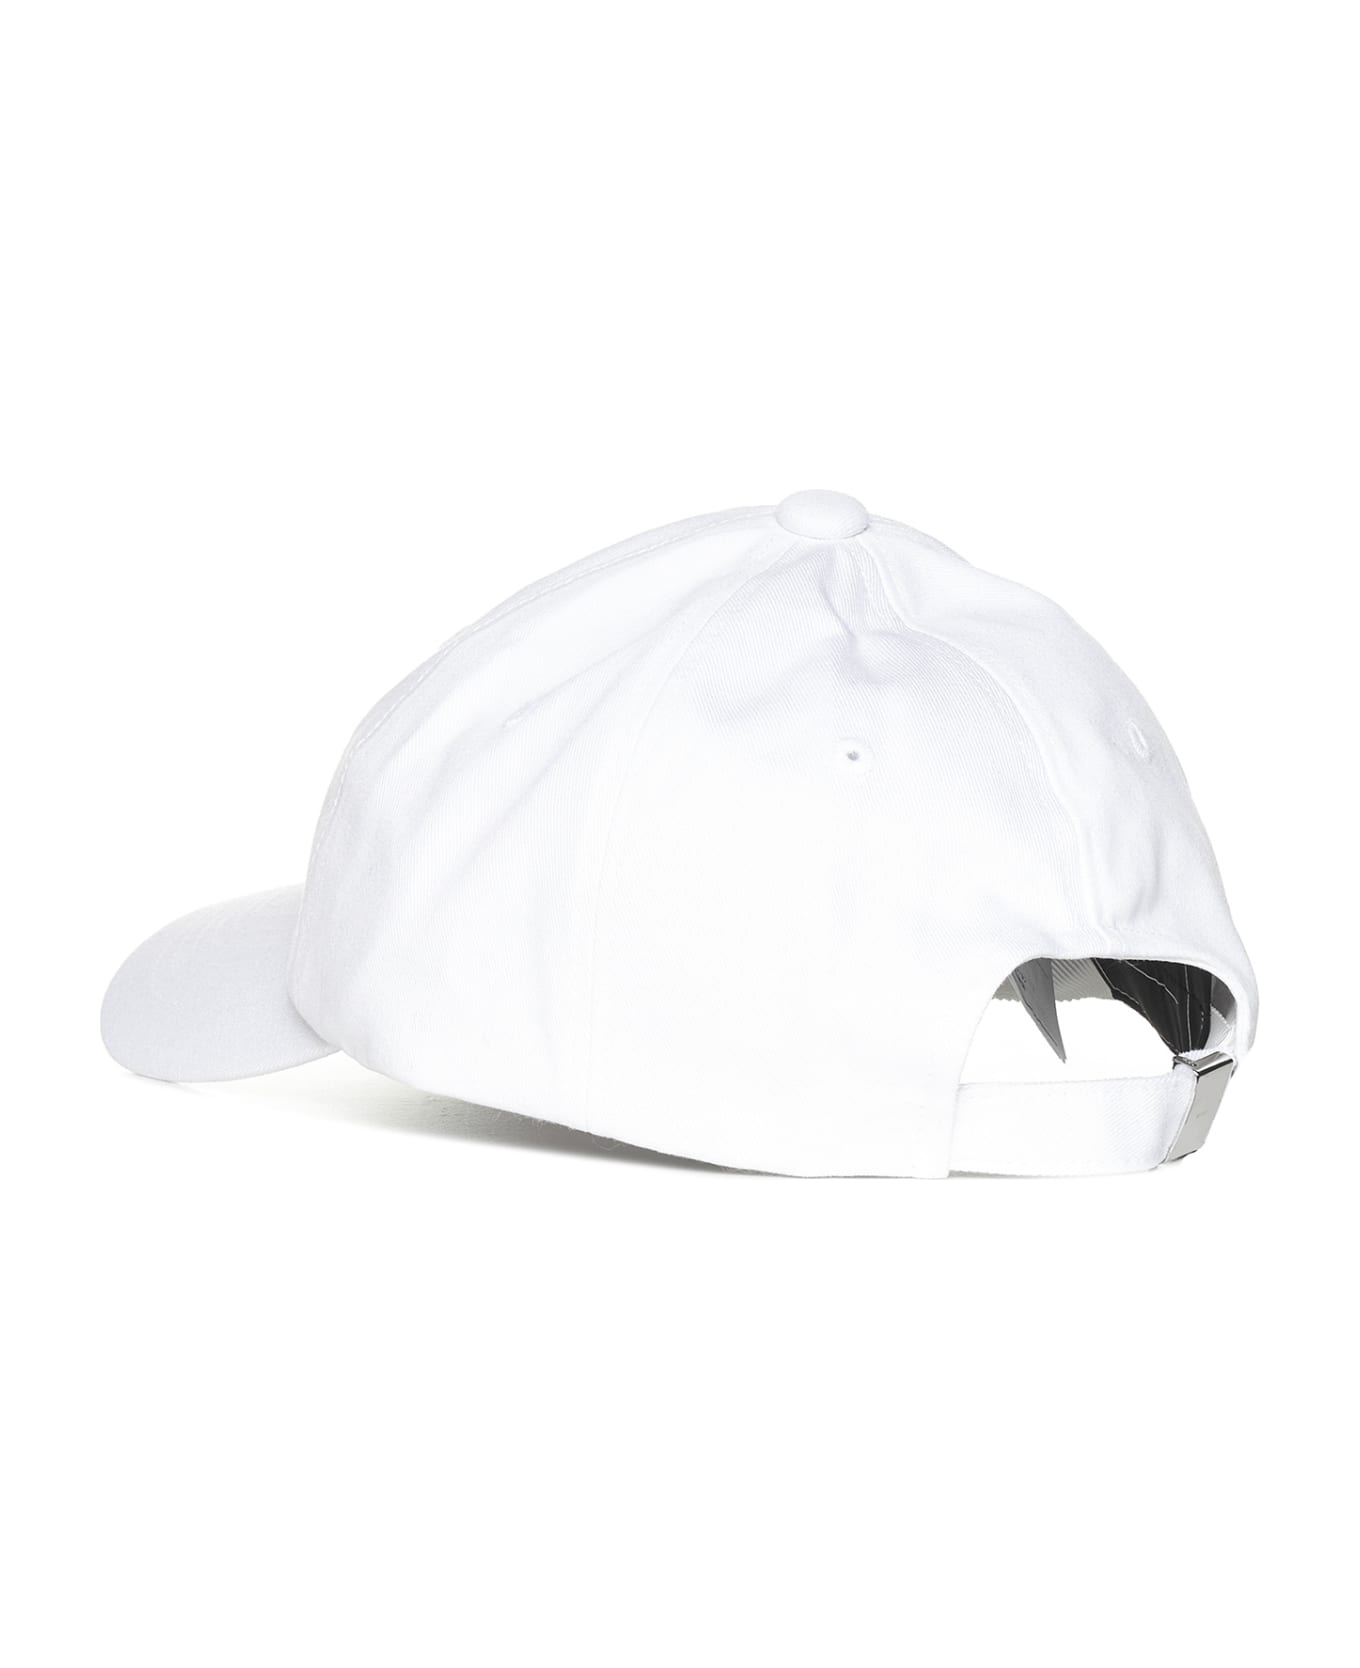 WE11 DONE Hat - White